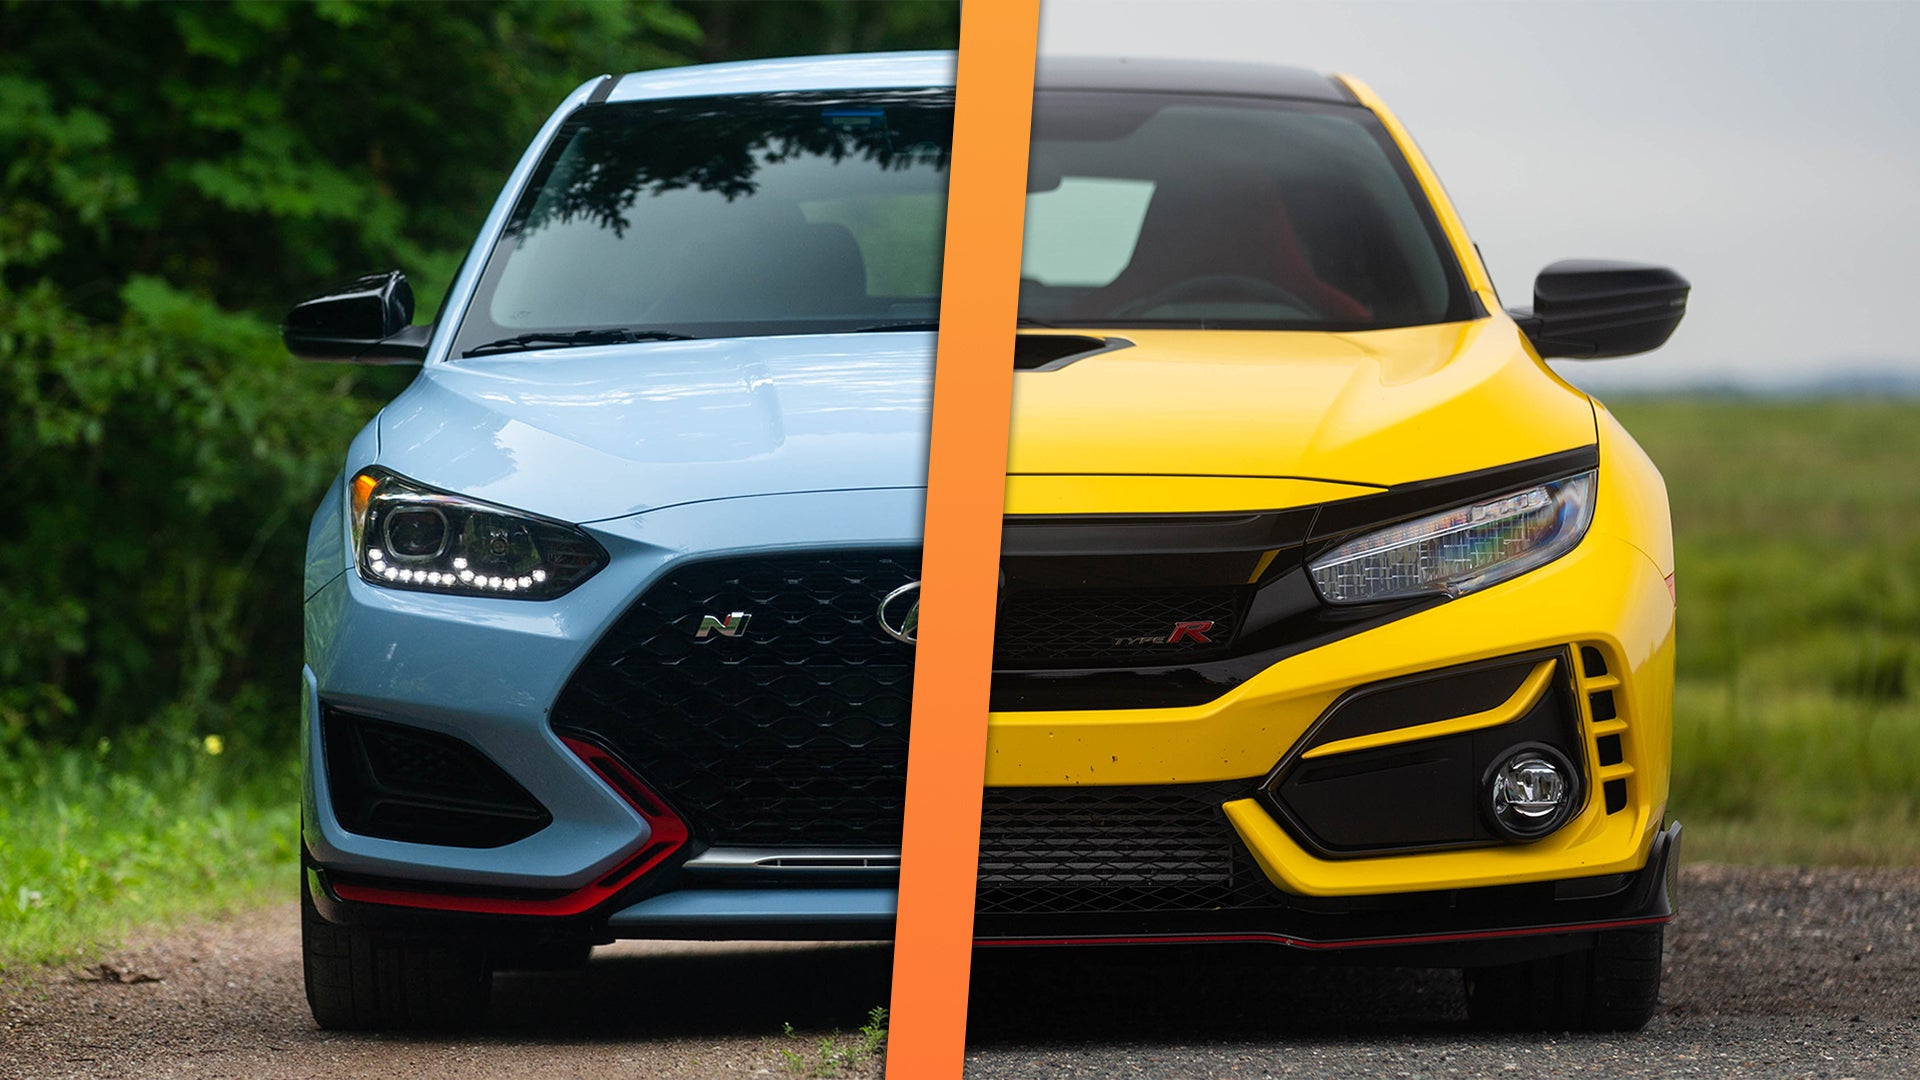 2021 Hyundai Veloster N vs. 2021 Honda Civic Type R Comparison Review: Finding the Hotter Hatch